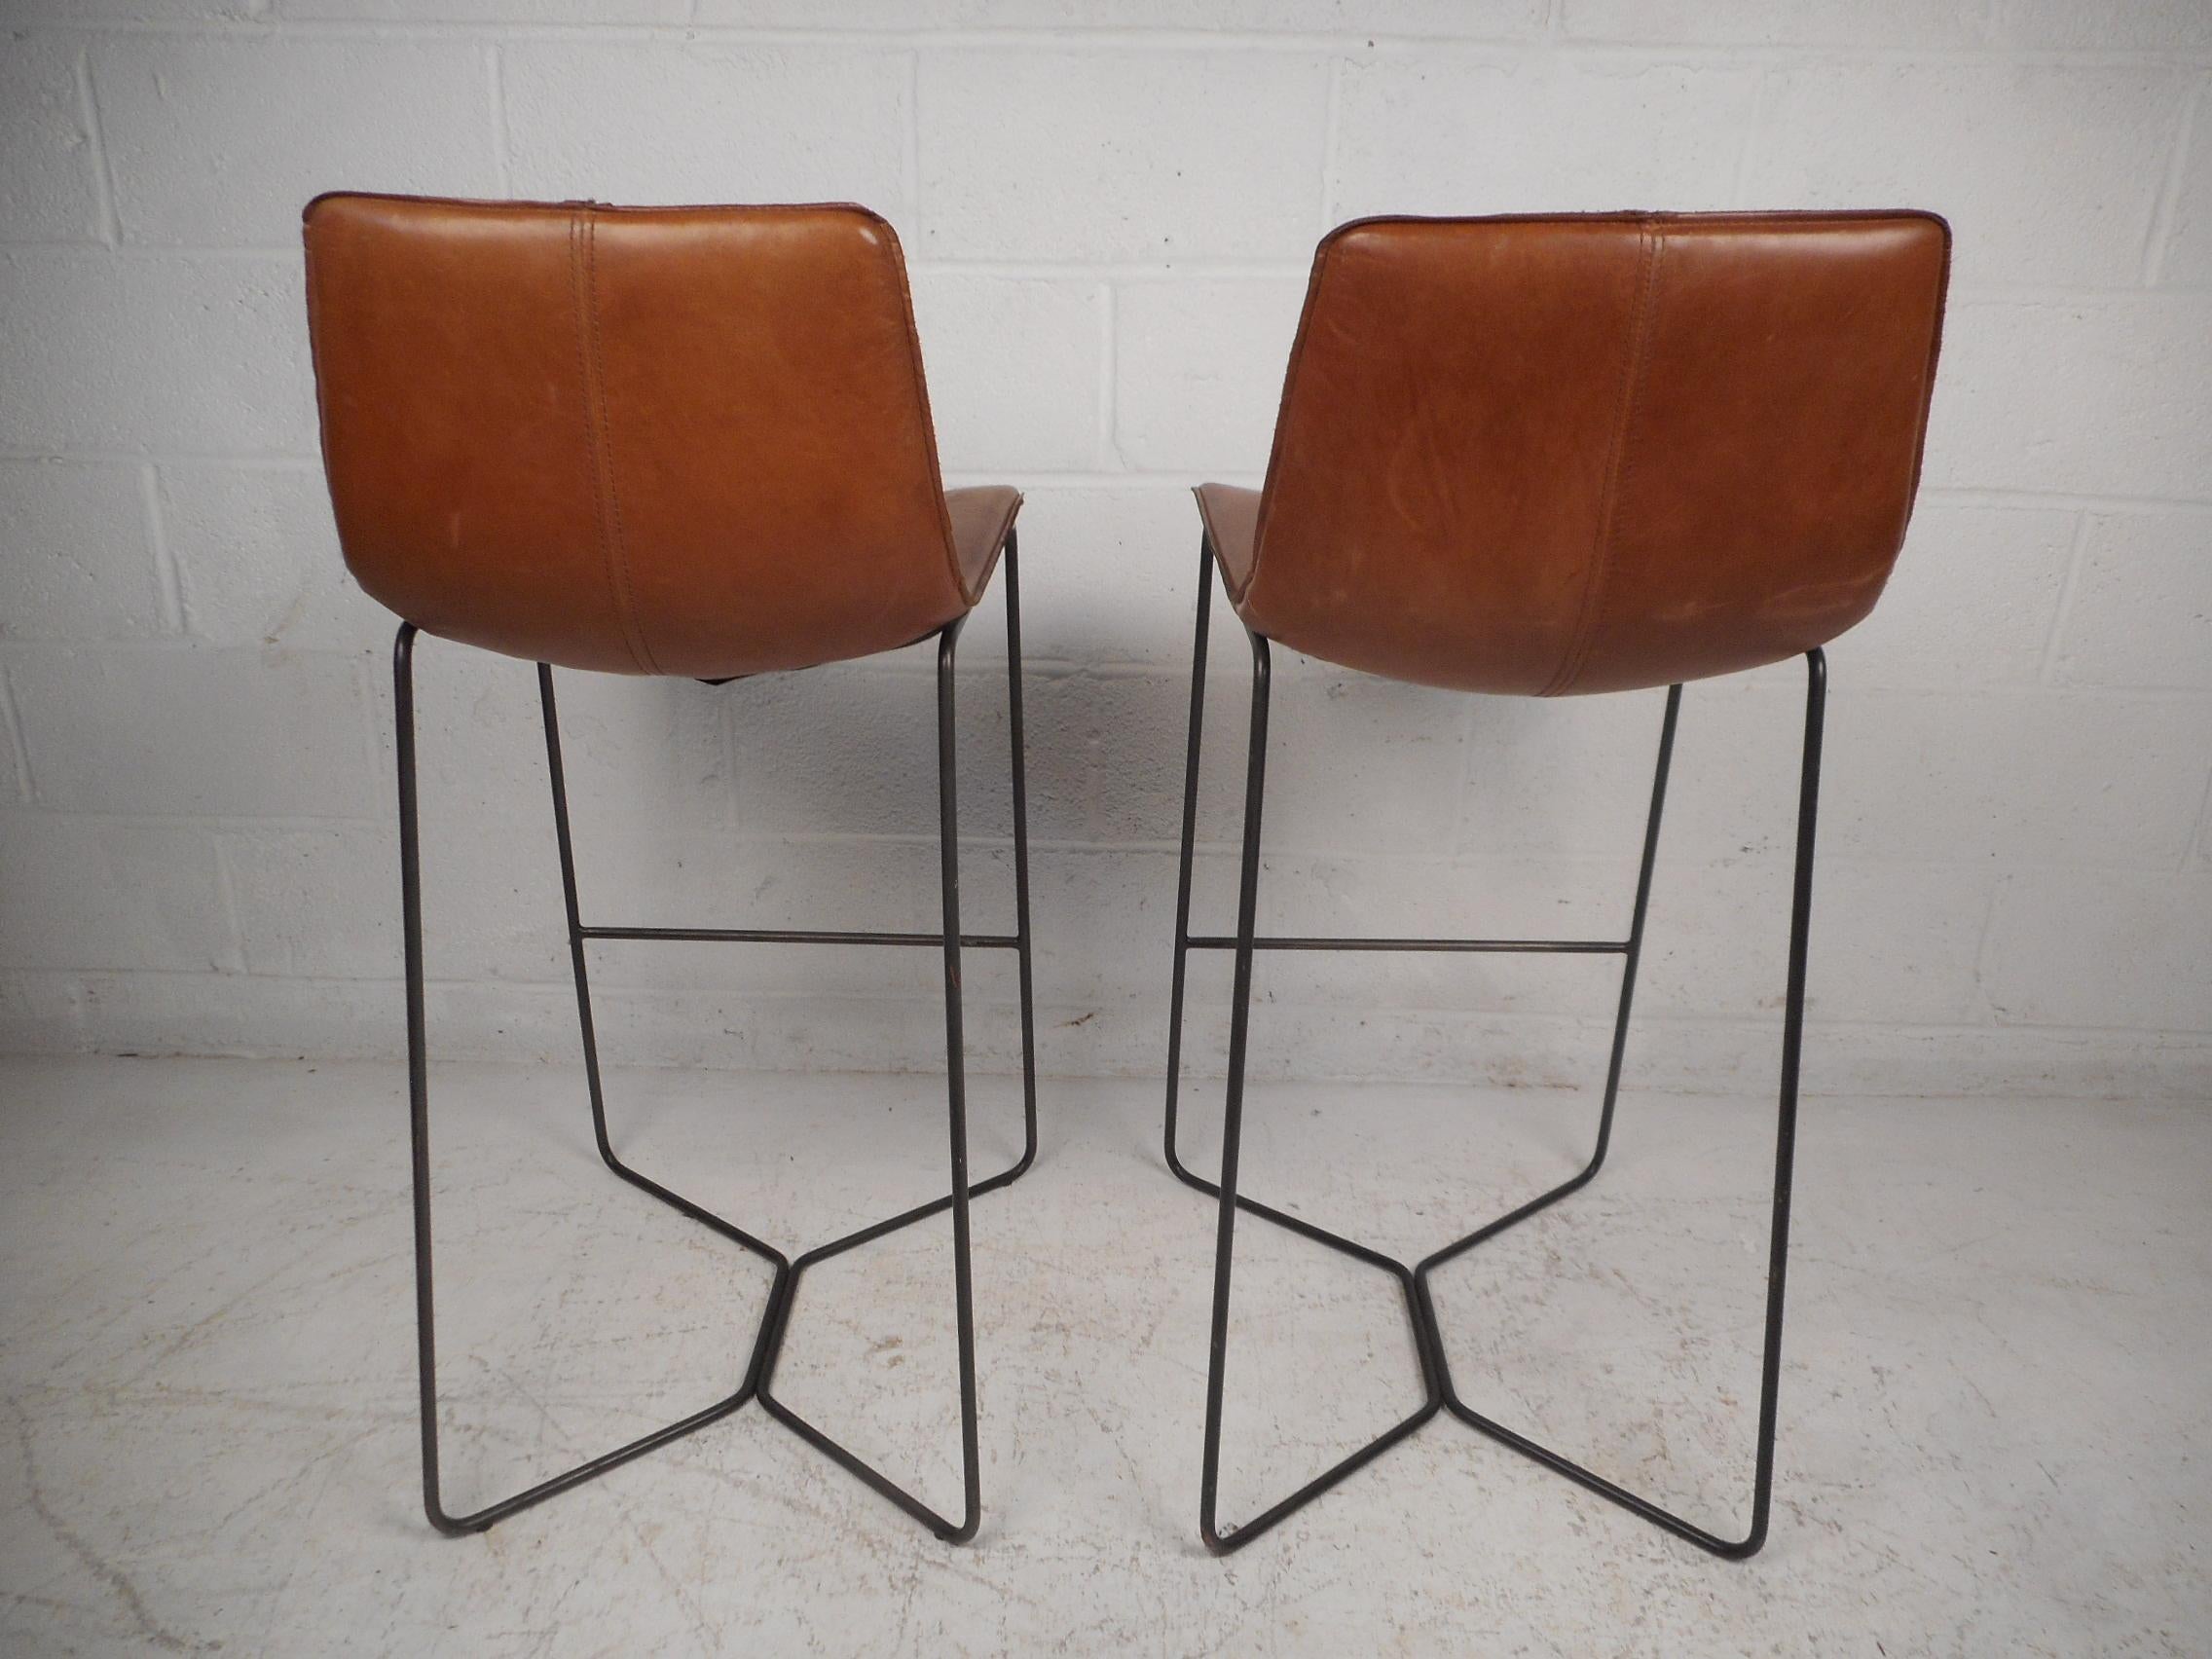 20th Century Pair of Mid-Century Modern Stools with Leather Upholstery